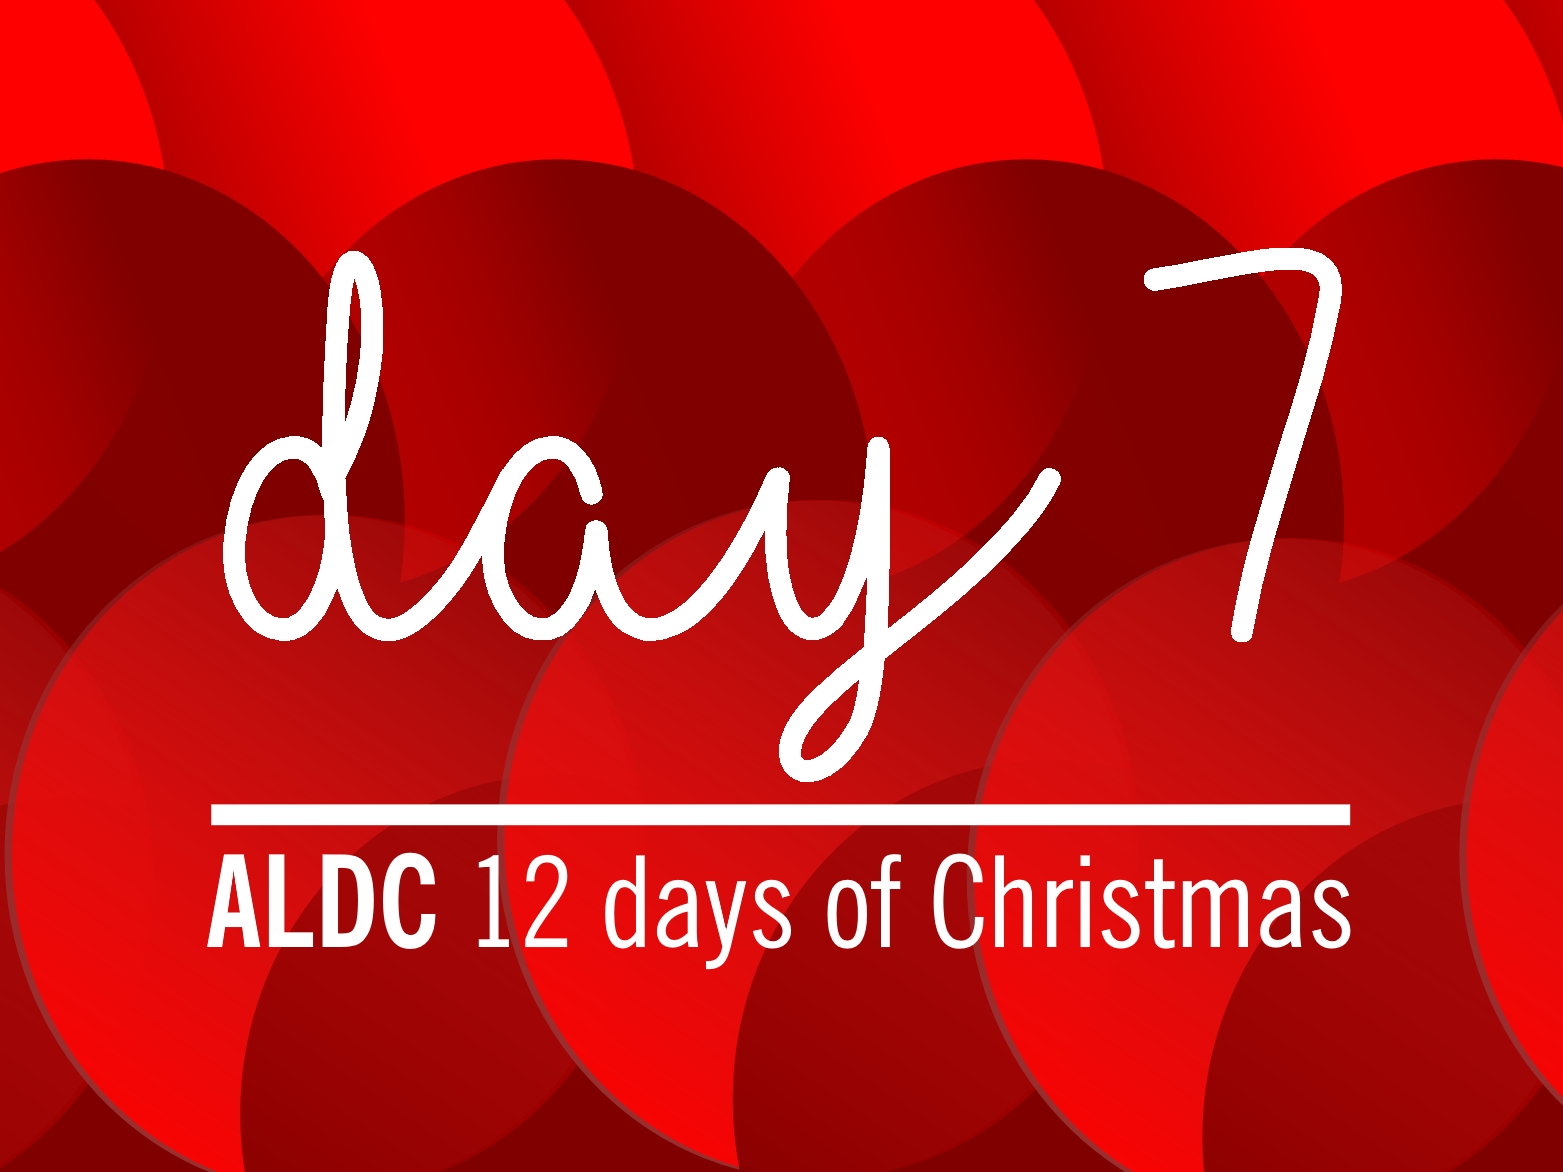 On the seventh day of Christmas, ALDC gave to me…